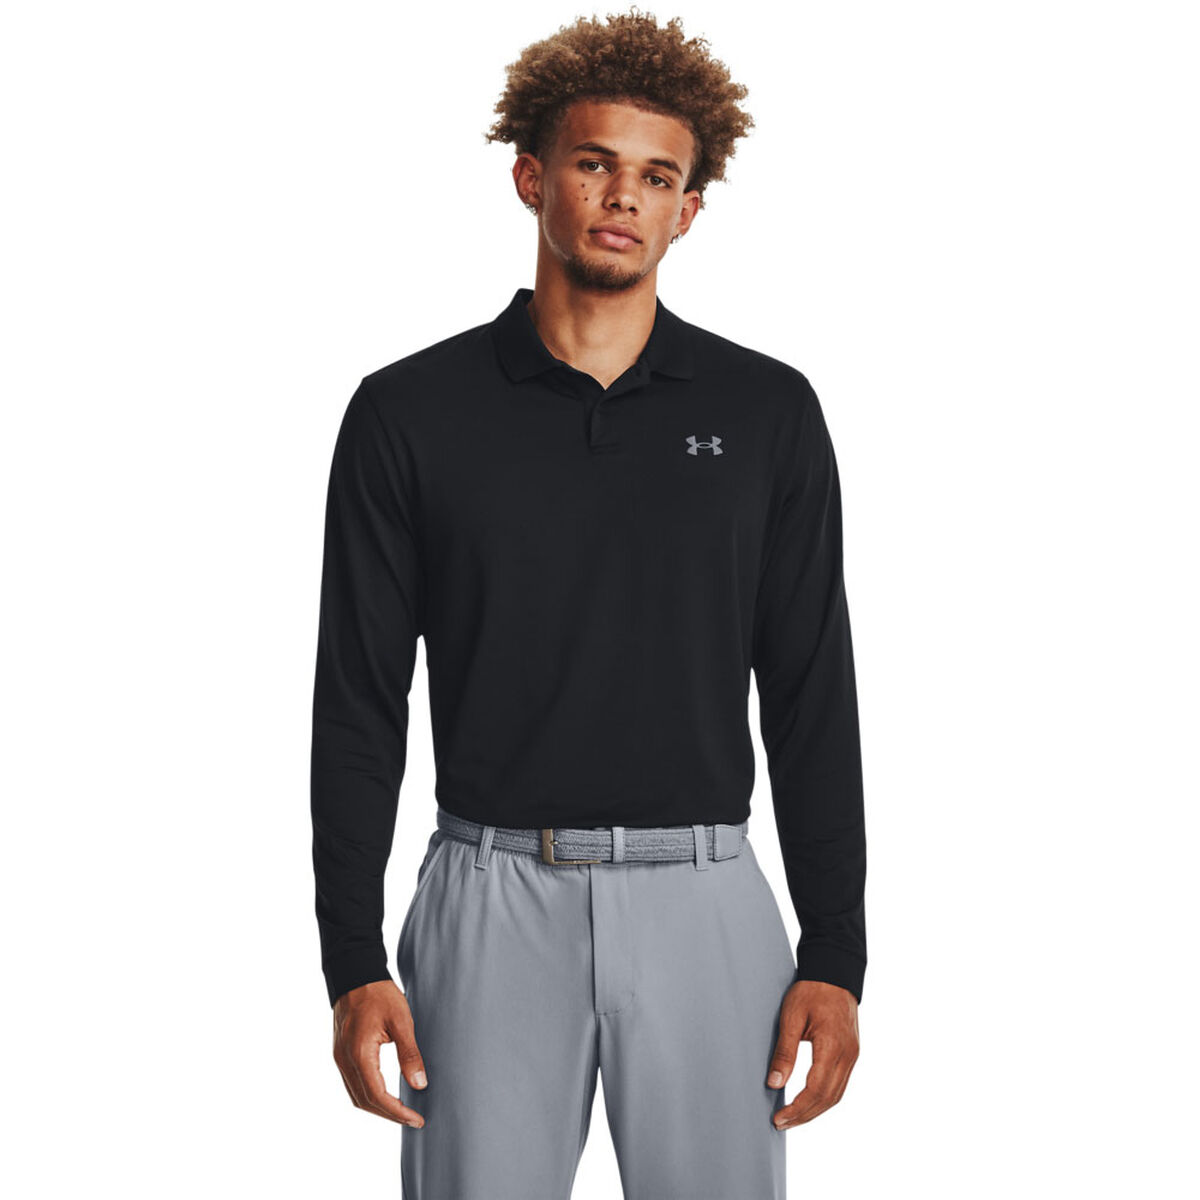 Under Armour Men’s Performance 3.0 Long Sleeve Golf Polo Shirt, Mens, Black/pitch gray, Small | American Golf